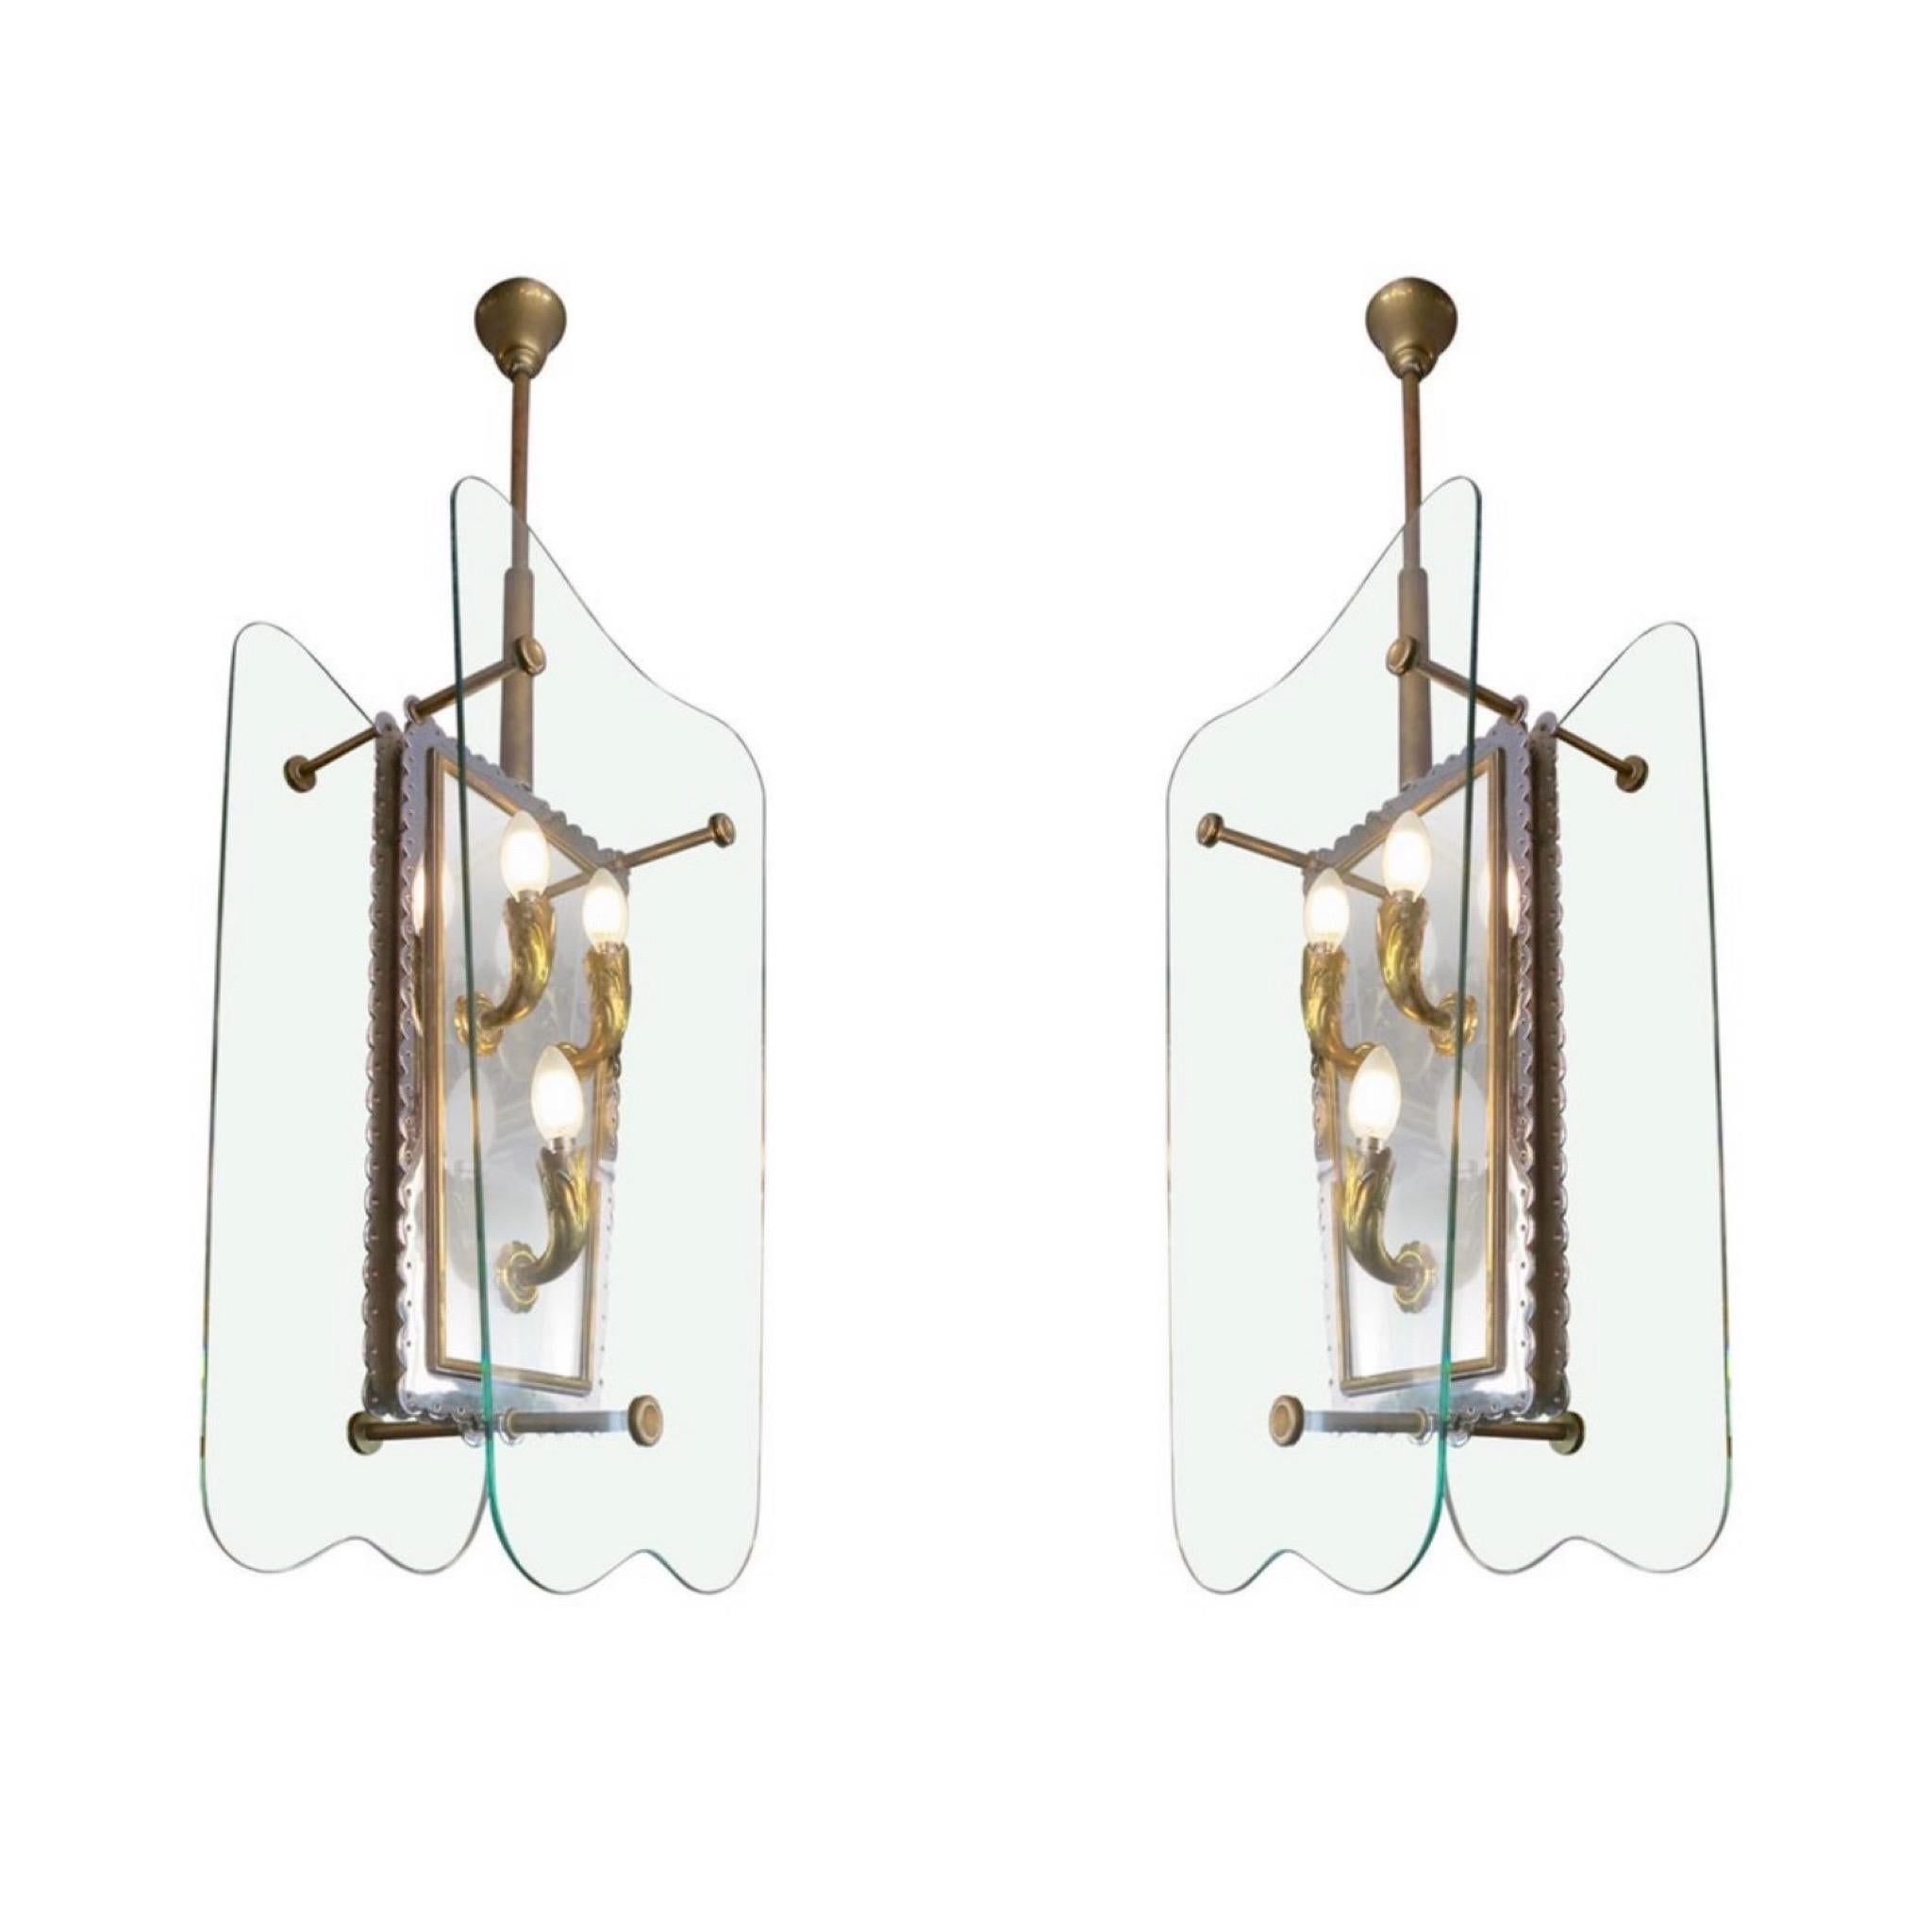 A very large pair of quality Italian lanterns, with six brass light fittings each, supported on a nickel plate with decorative circular border and inner brass slip. The shield shaped glass shades held in place by brass arms and capped with circular